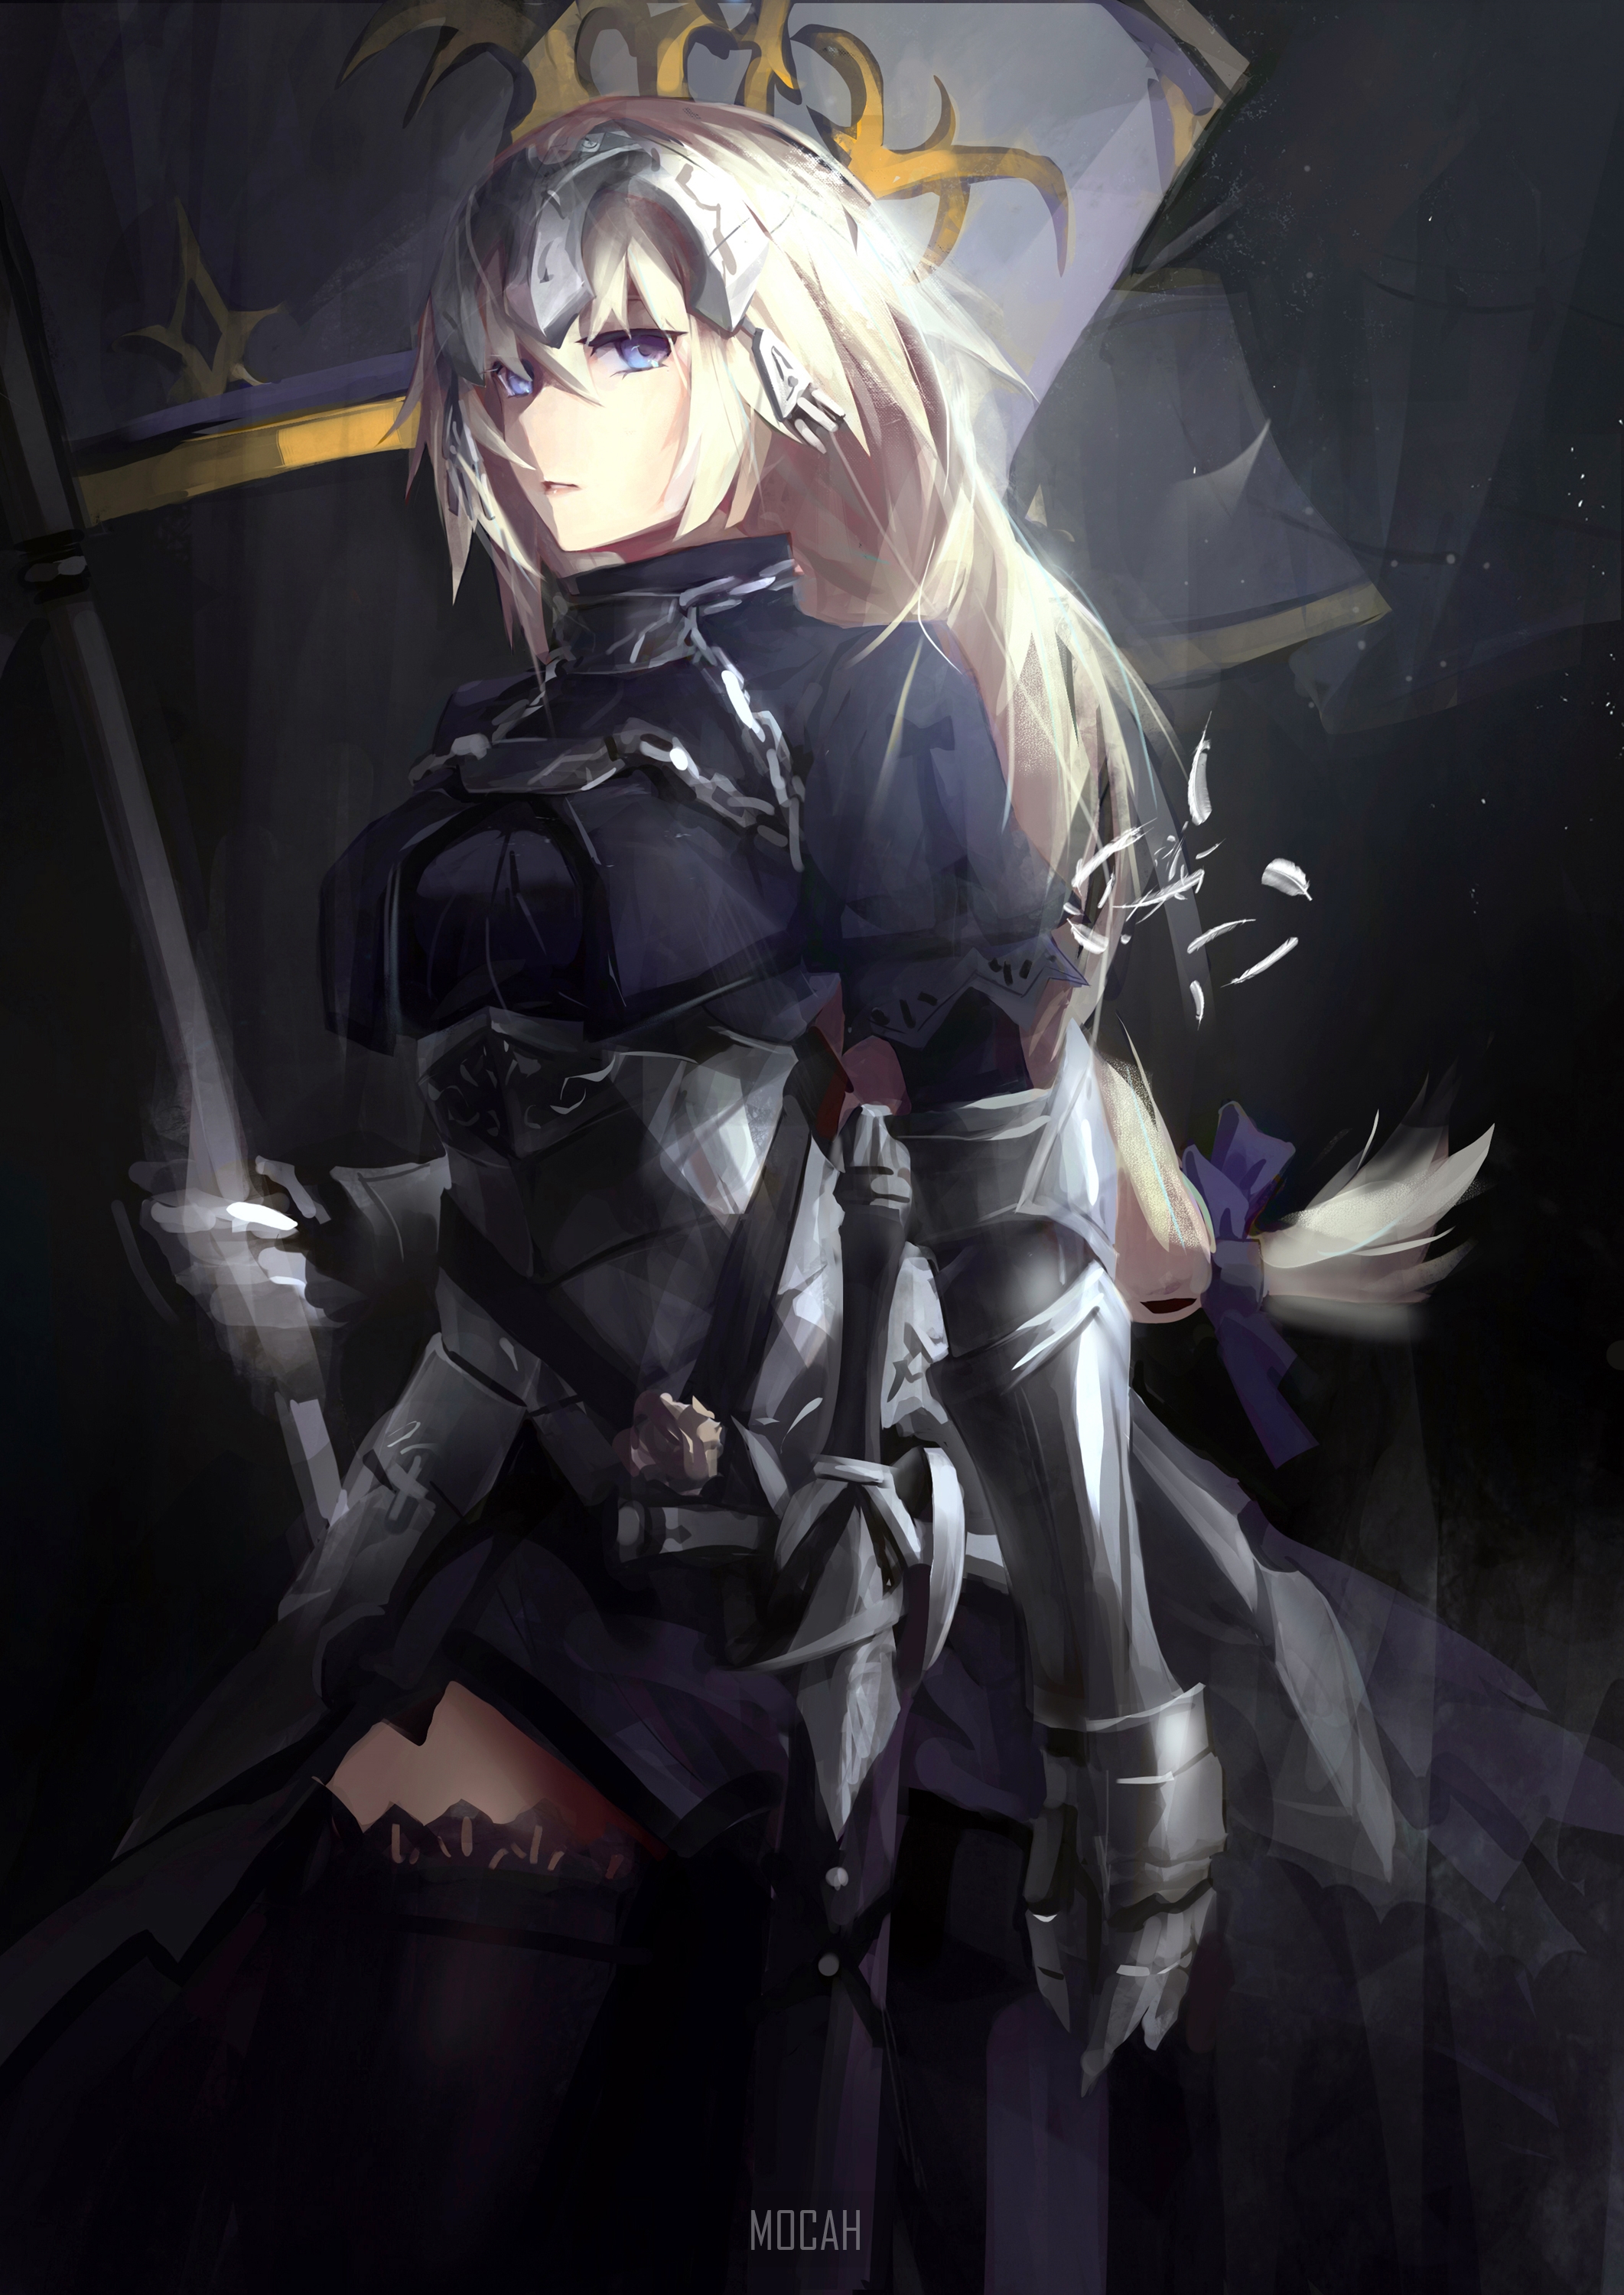 Fate Series, Fate Apocrypha, Anime Girl, Ruler (Fate Apocrypha), Thighs, Armor, Women With Swords, FGO, Jeanne DArc (Fate), Blond Hair, Long Hair, Blue Eyes, Looking At Viewer, Open Mouth, Black Stockings, Big Boobs